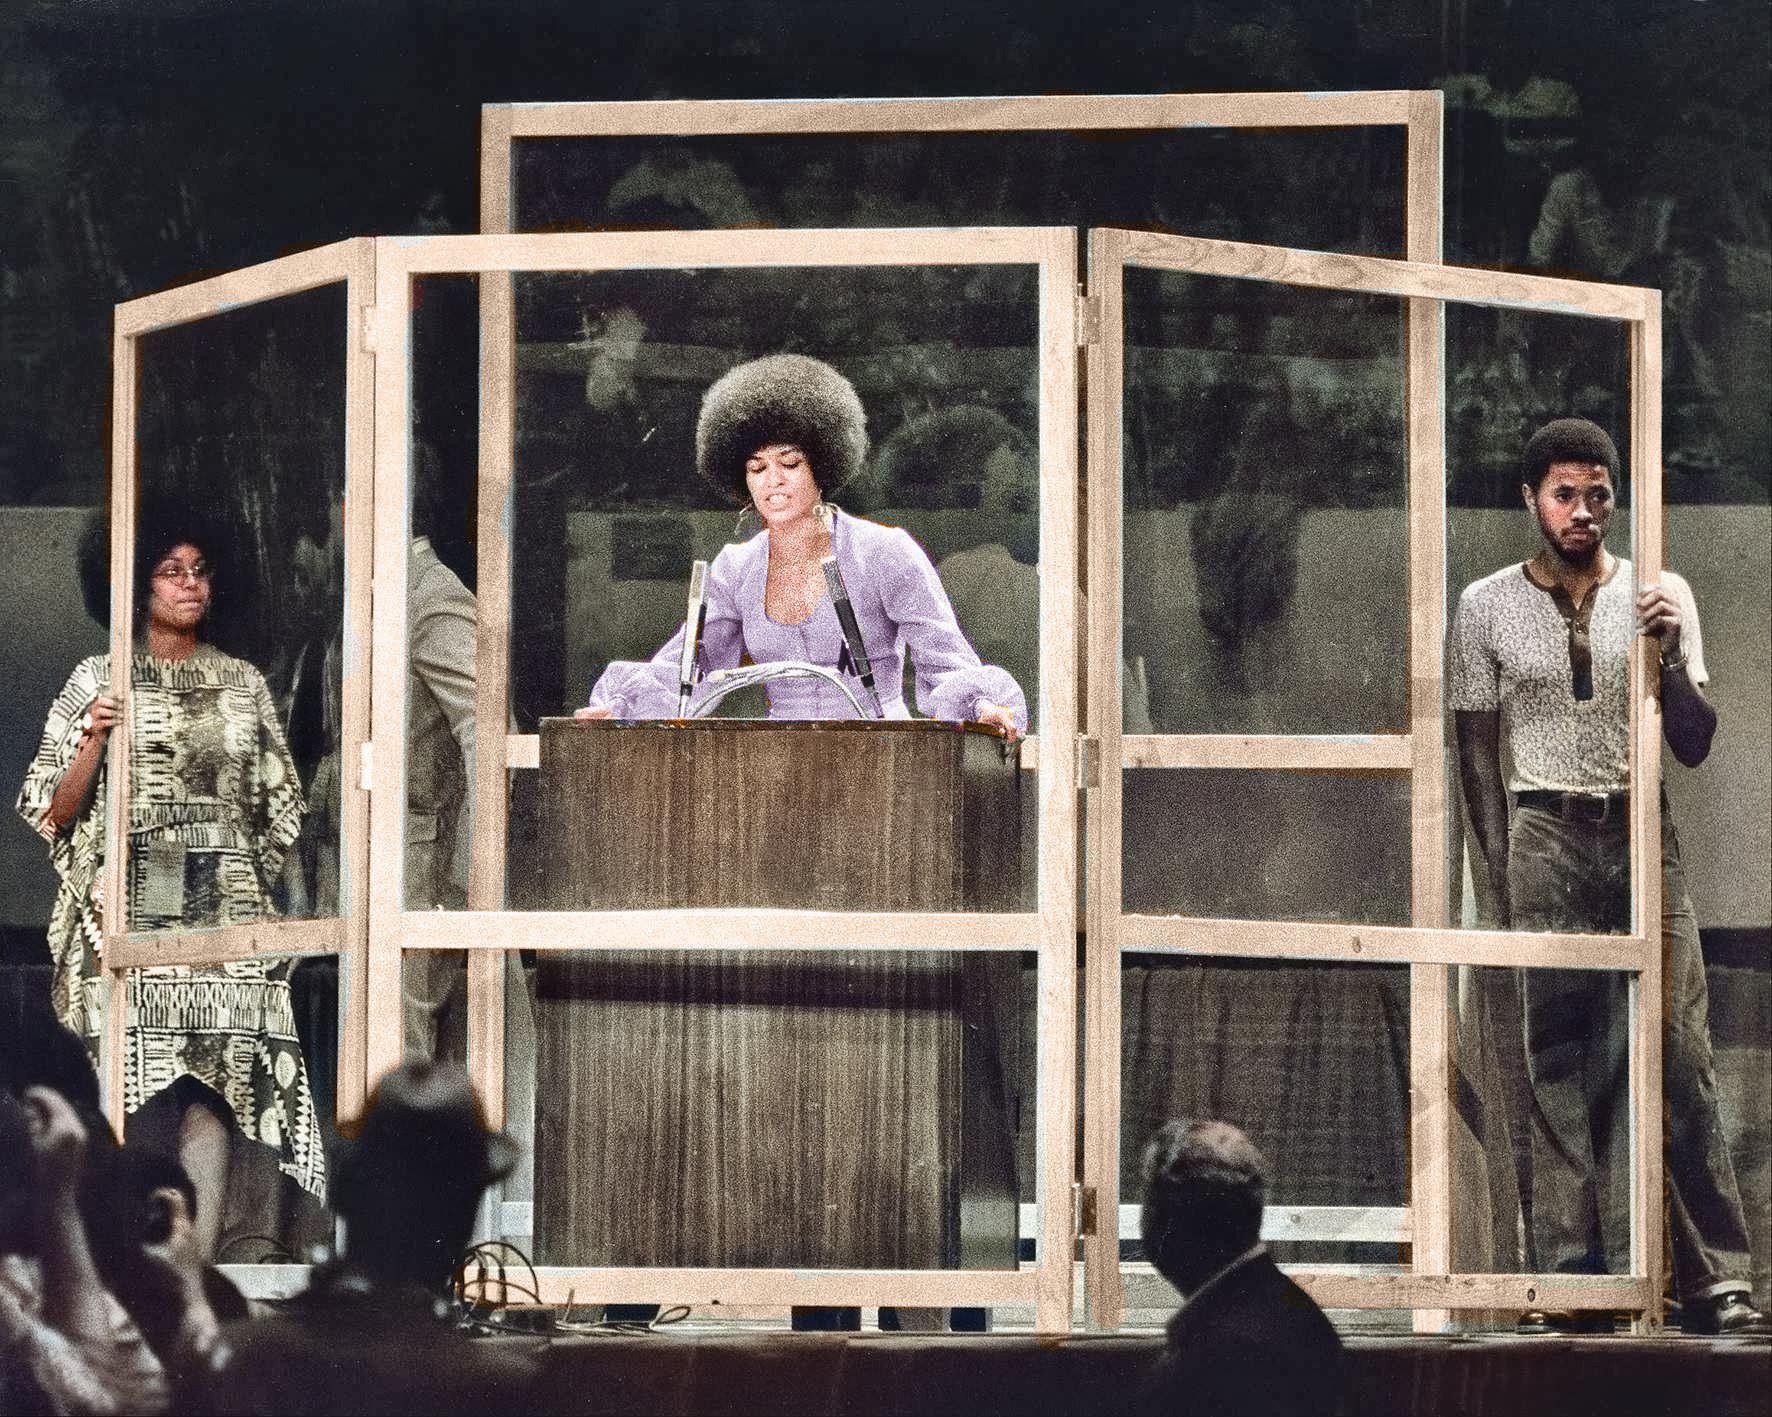 Angela Davis stands behind bulletproof glass panels while speaking at Madison Square Garden